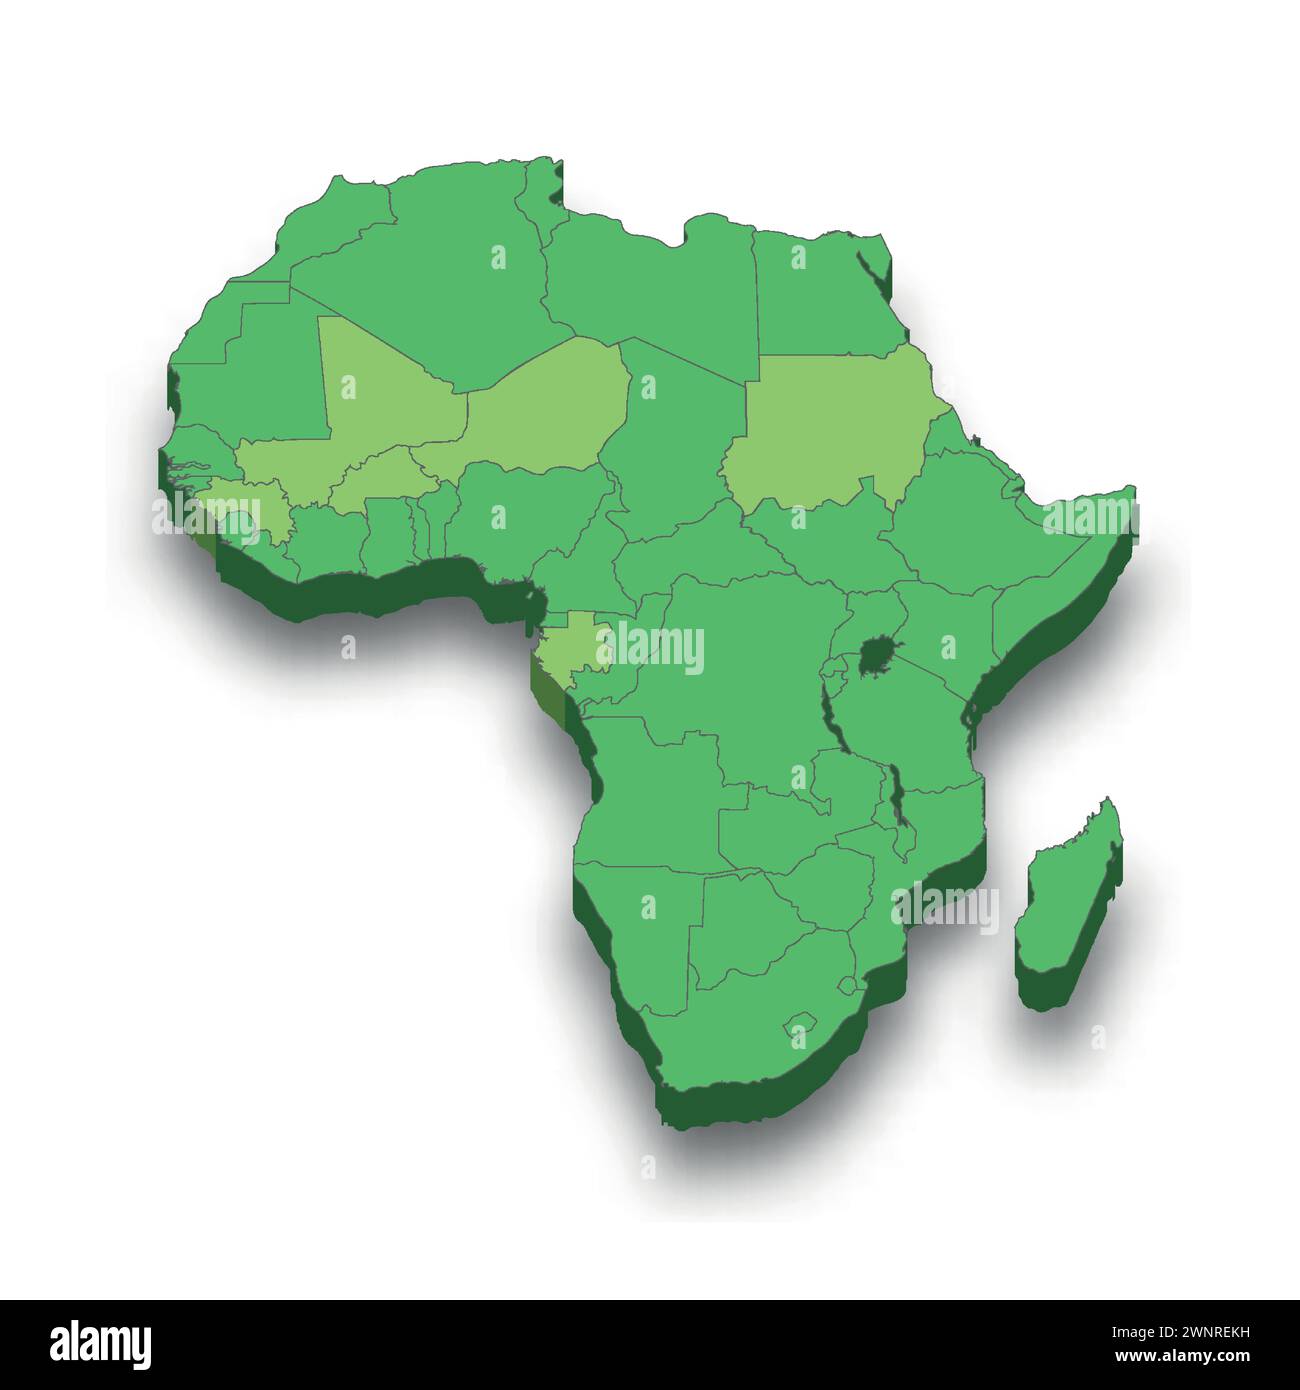 African Union location within Africa 3d isometric map Stock Vector